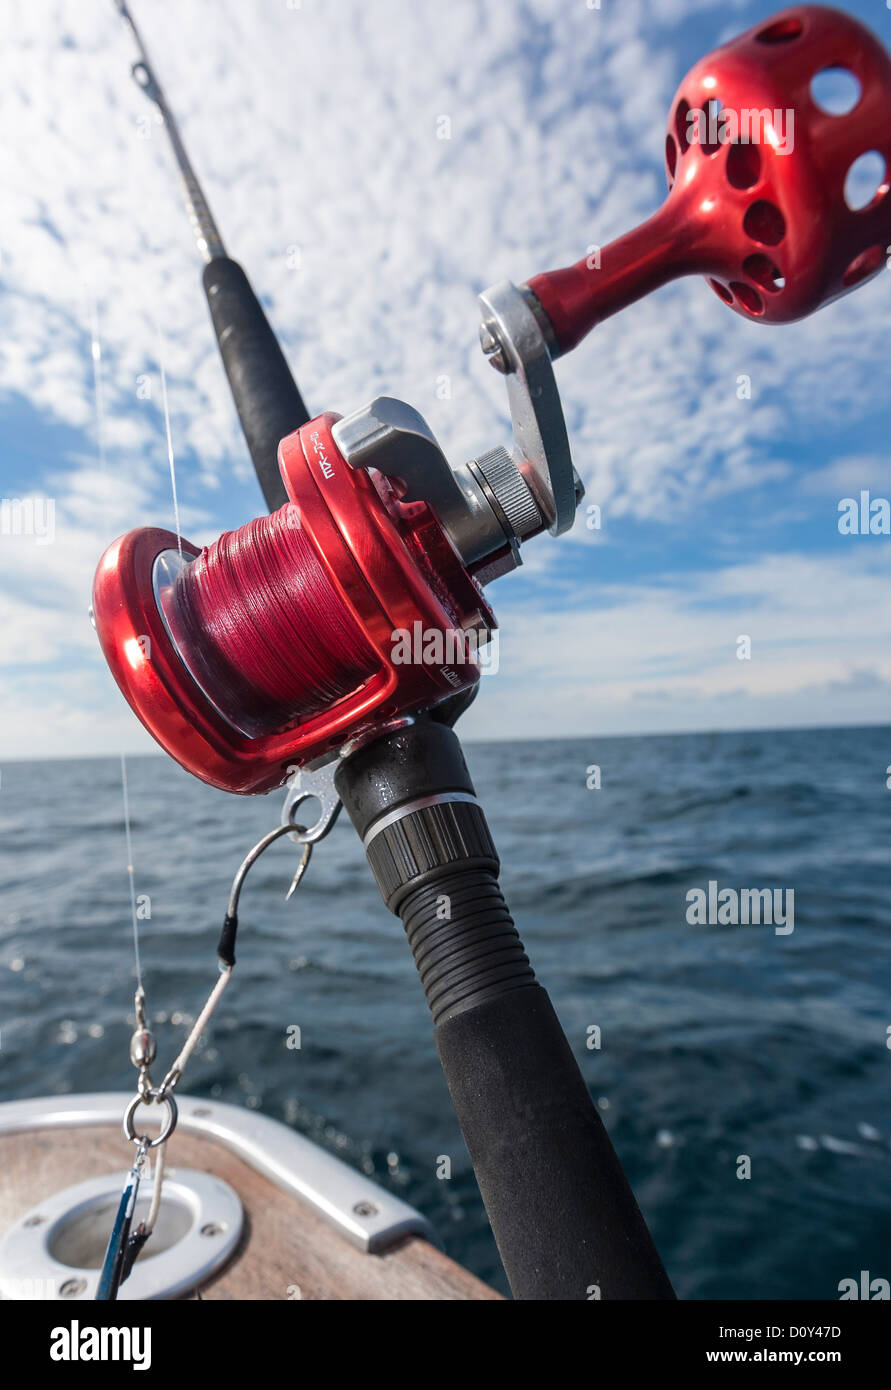 https://c8.alamy.com/comp/D0Y47D/red-anodized-sea-fishing-trolling-reel-6-to-1-multiplier-for-jigging-D0Y47D.jpg